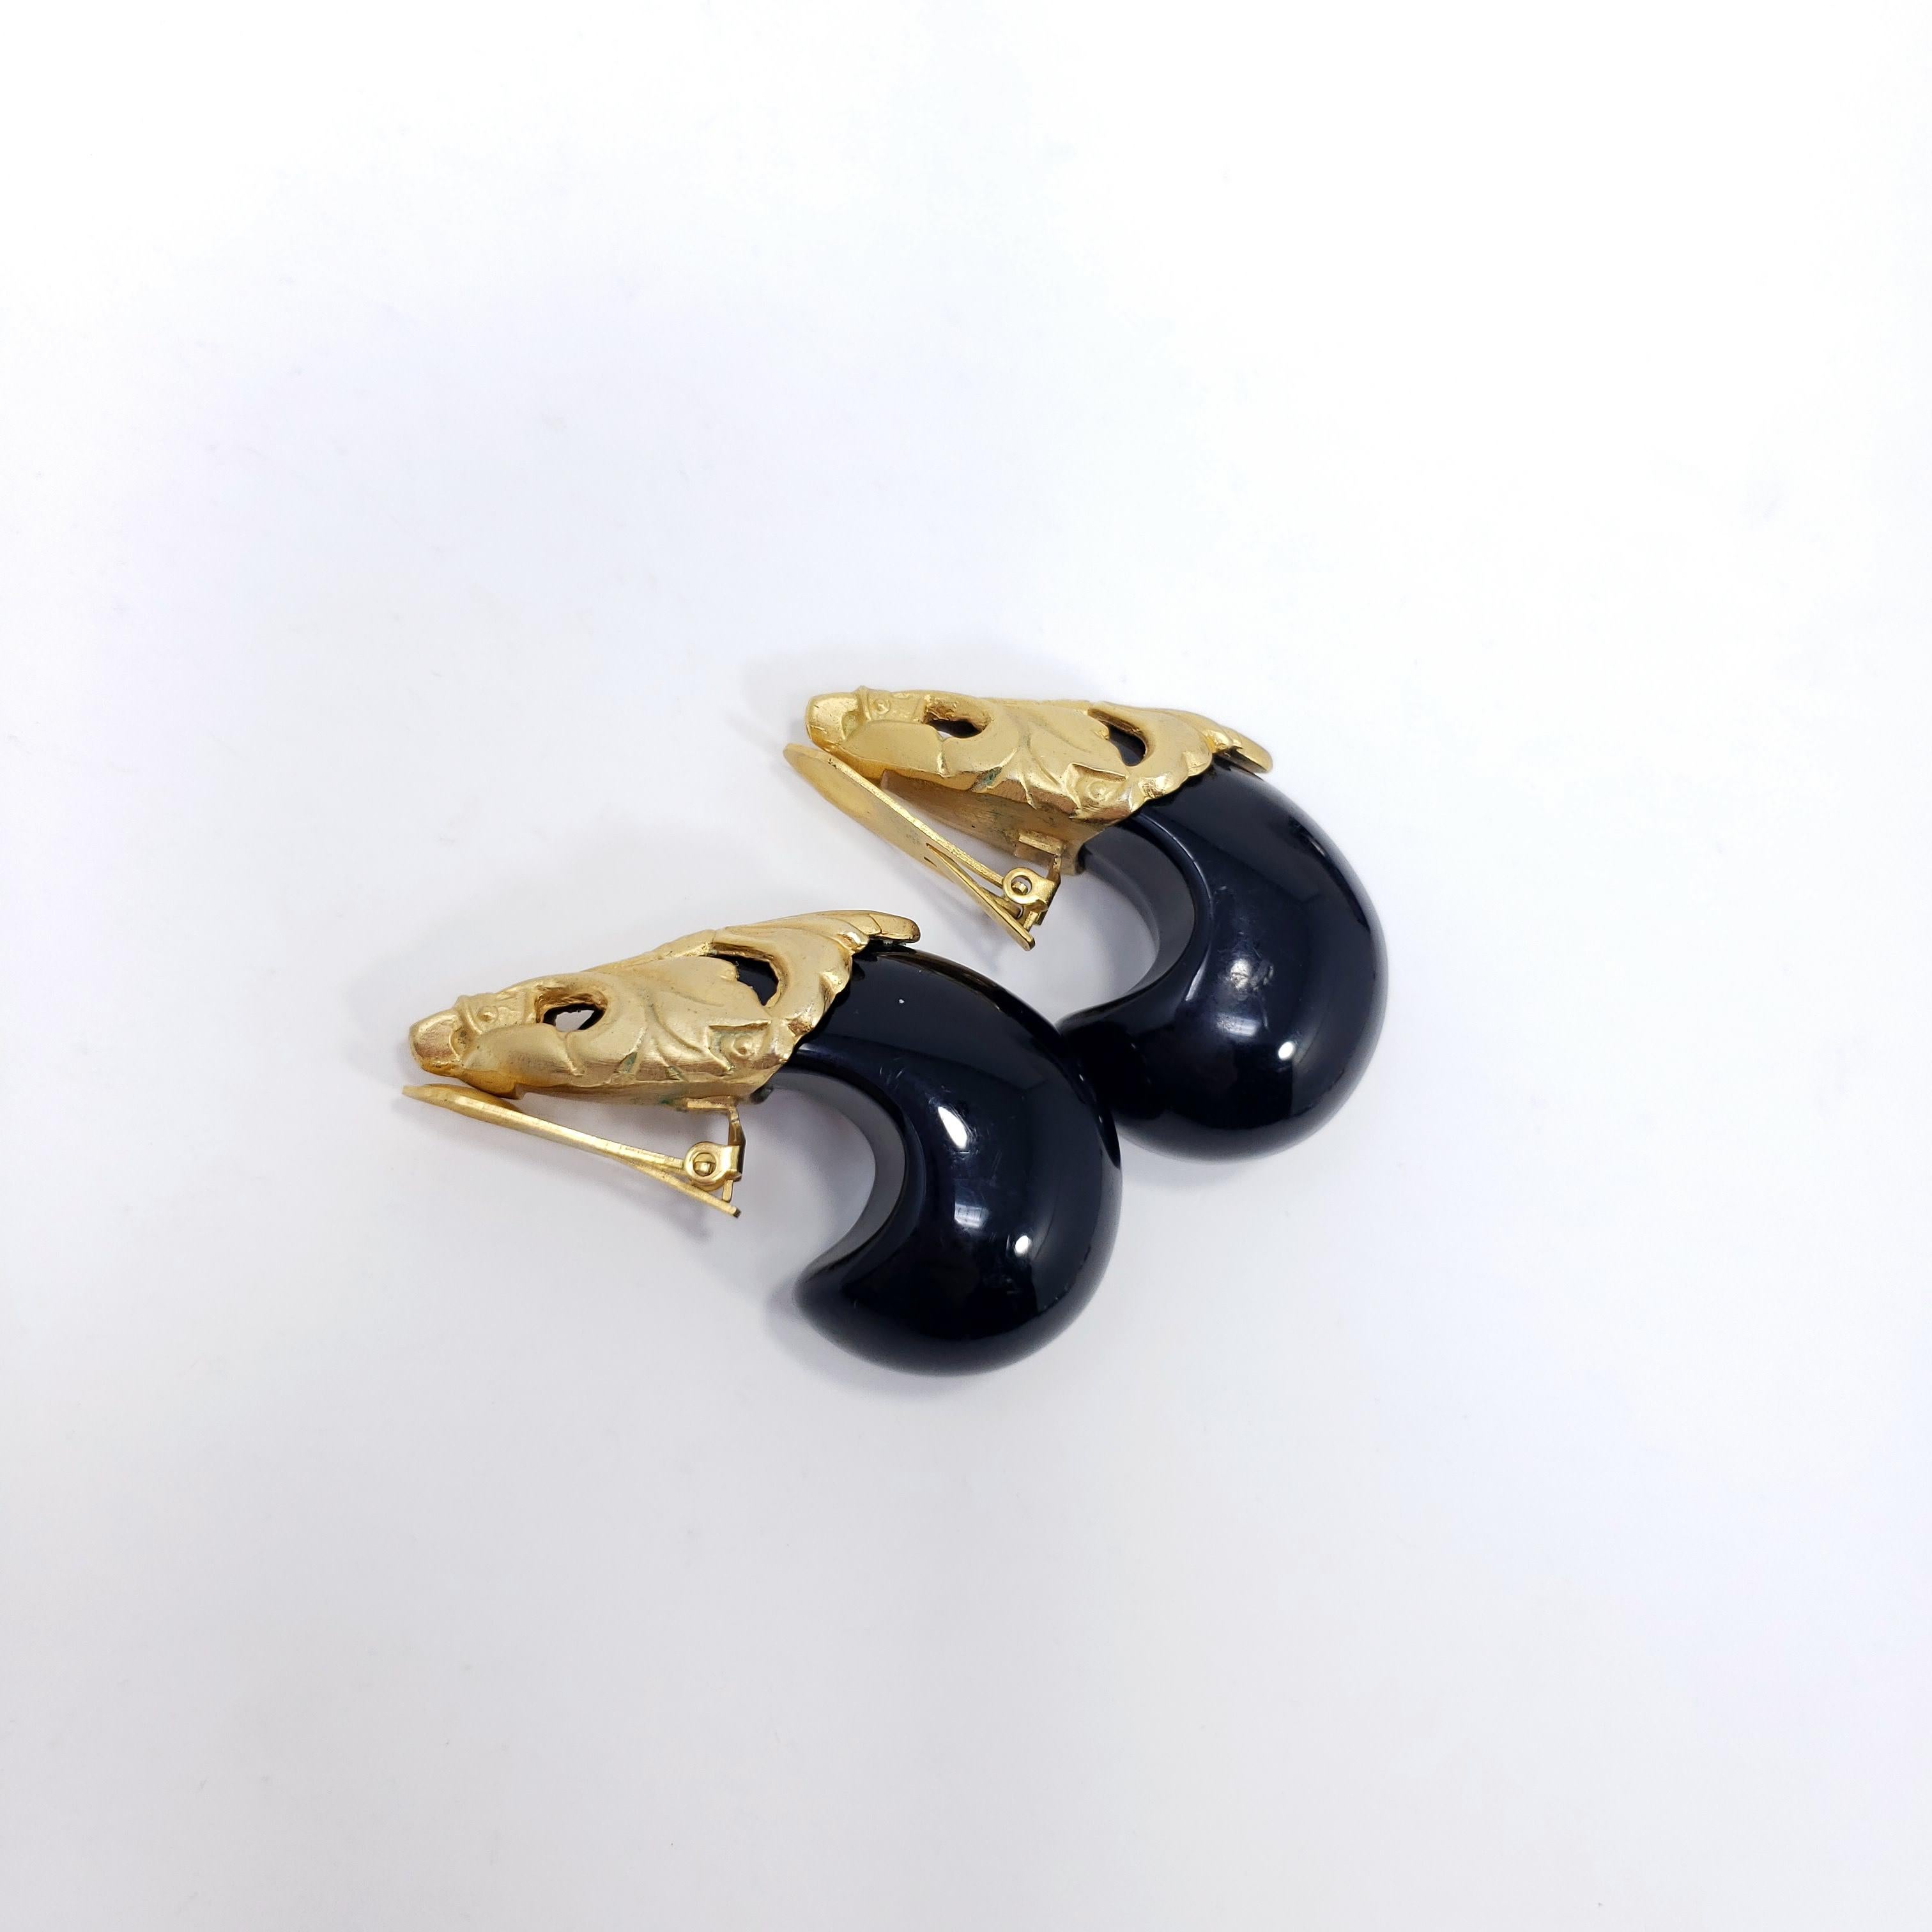 Retro chic! These big and bold clip on earrings feature chunky resin accents for a stylish look.

Gold-tone.

Circa late 1900s.